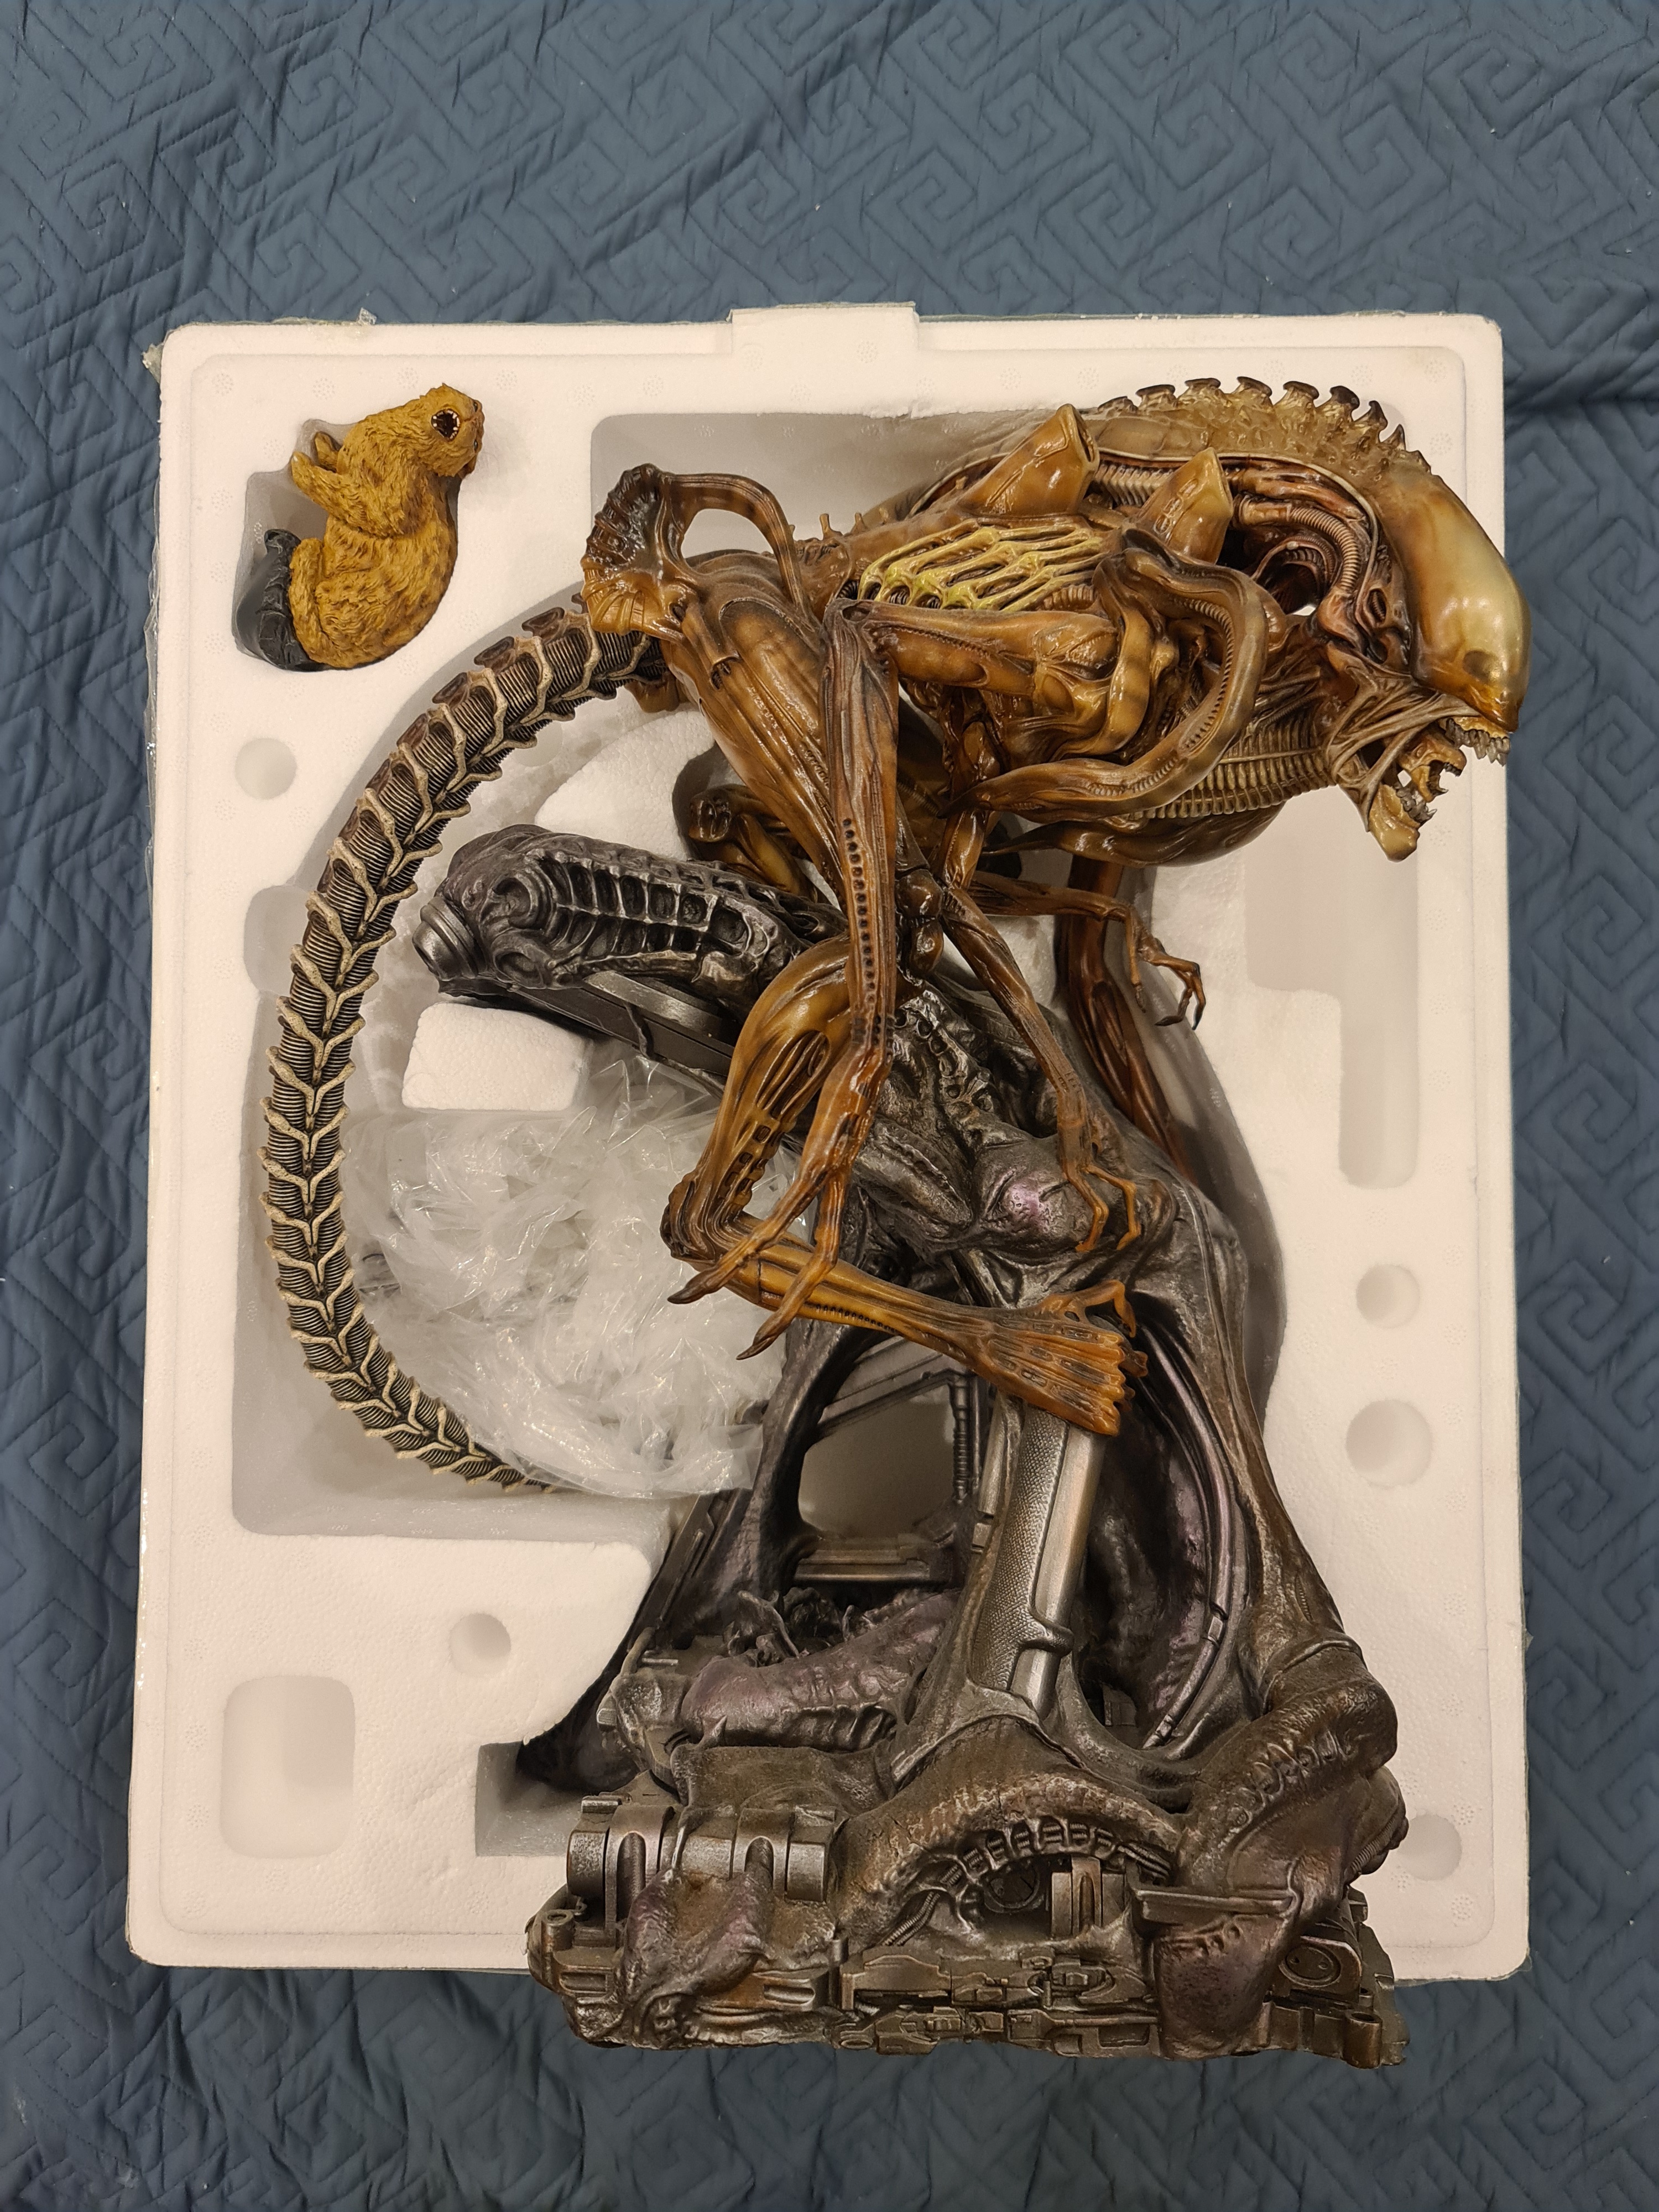 Legacy Effects - Alien Warrior - Mythos - Maquette by Sideshow Collectibles - Limited Edition: 078 / 250